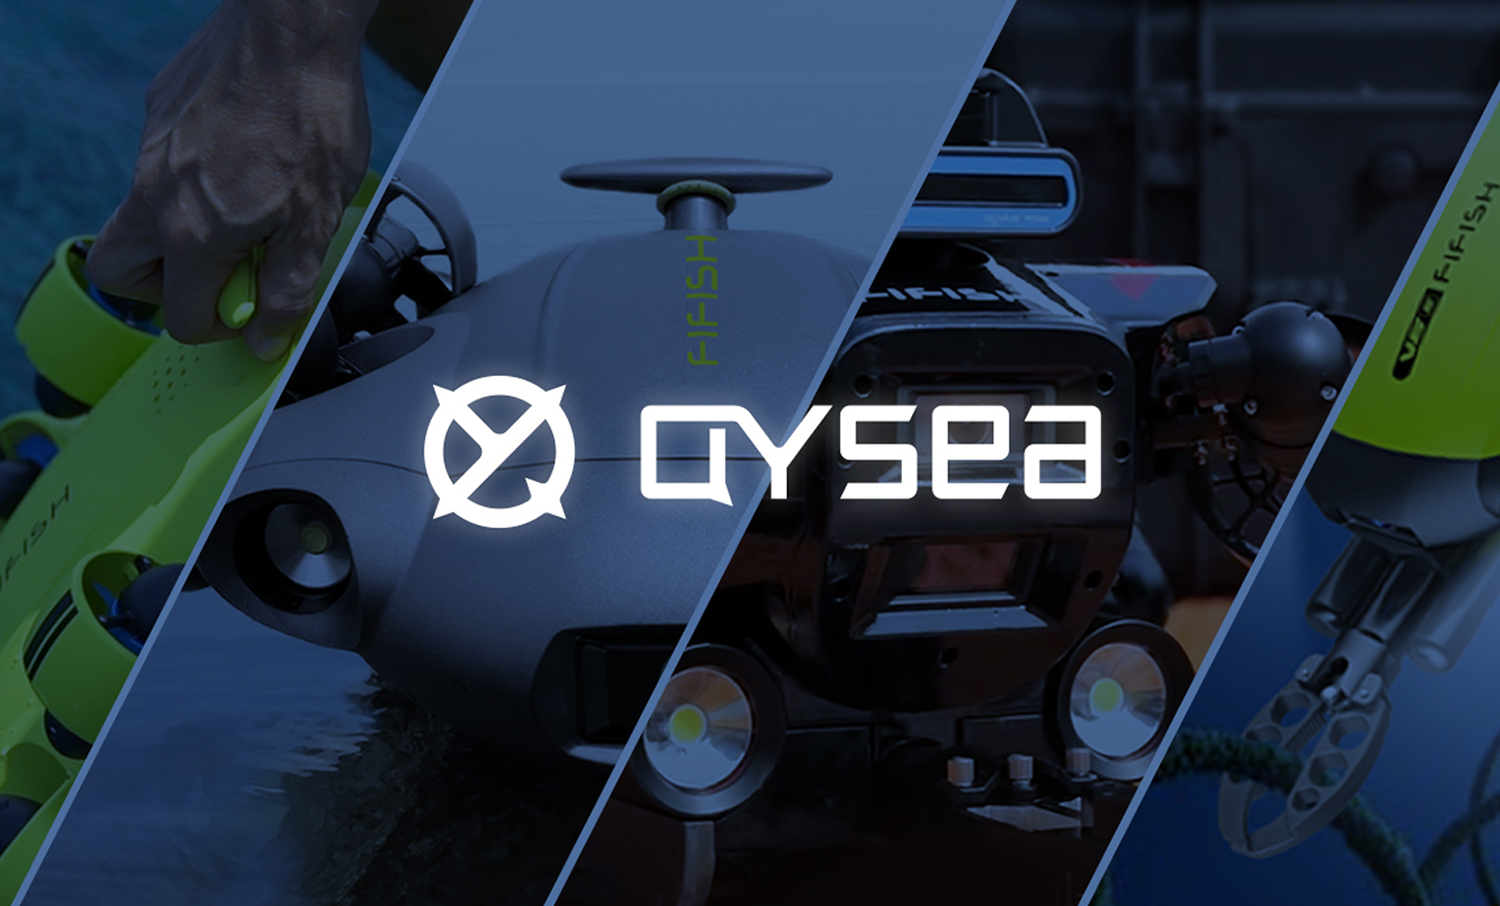 QYSEA Technology Completes Tens of Millions in Funding to Develop Closed-Loop Solutions in its Underwater Robots